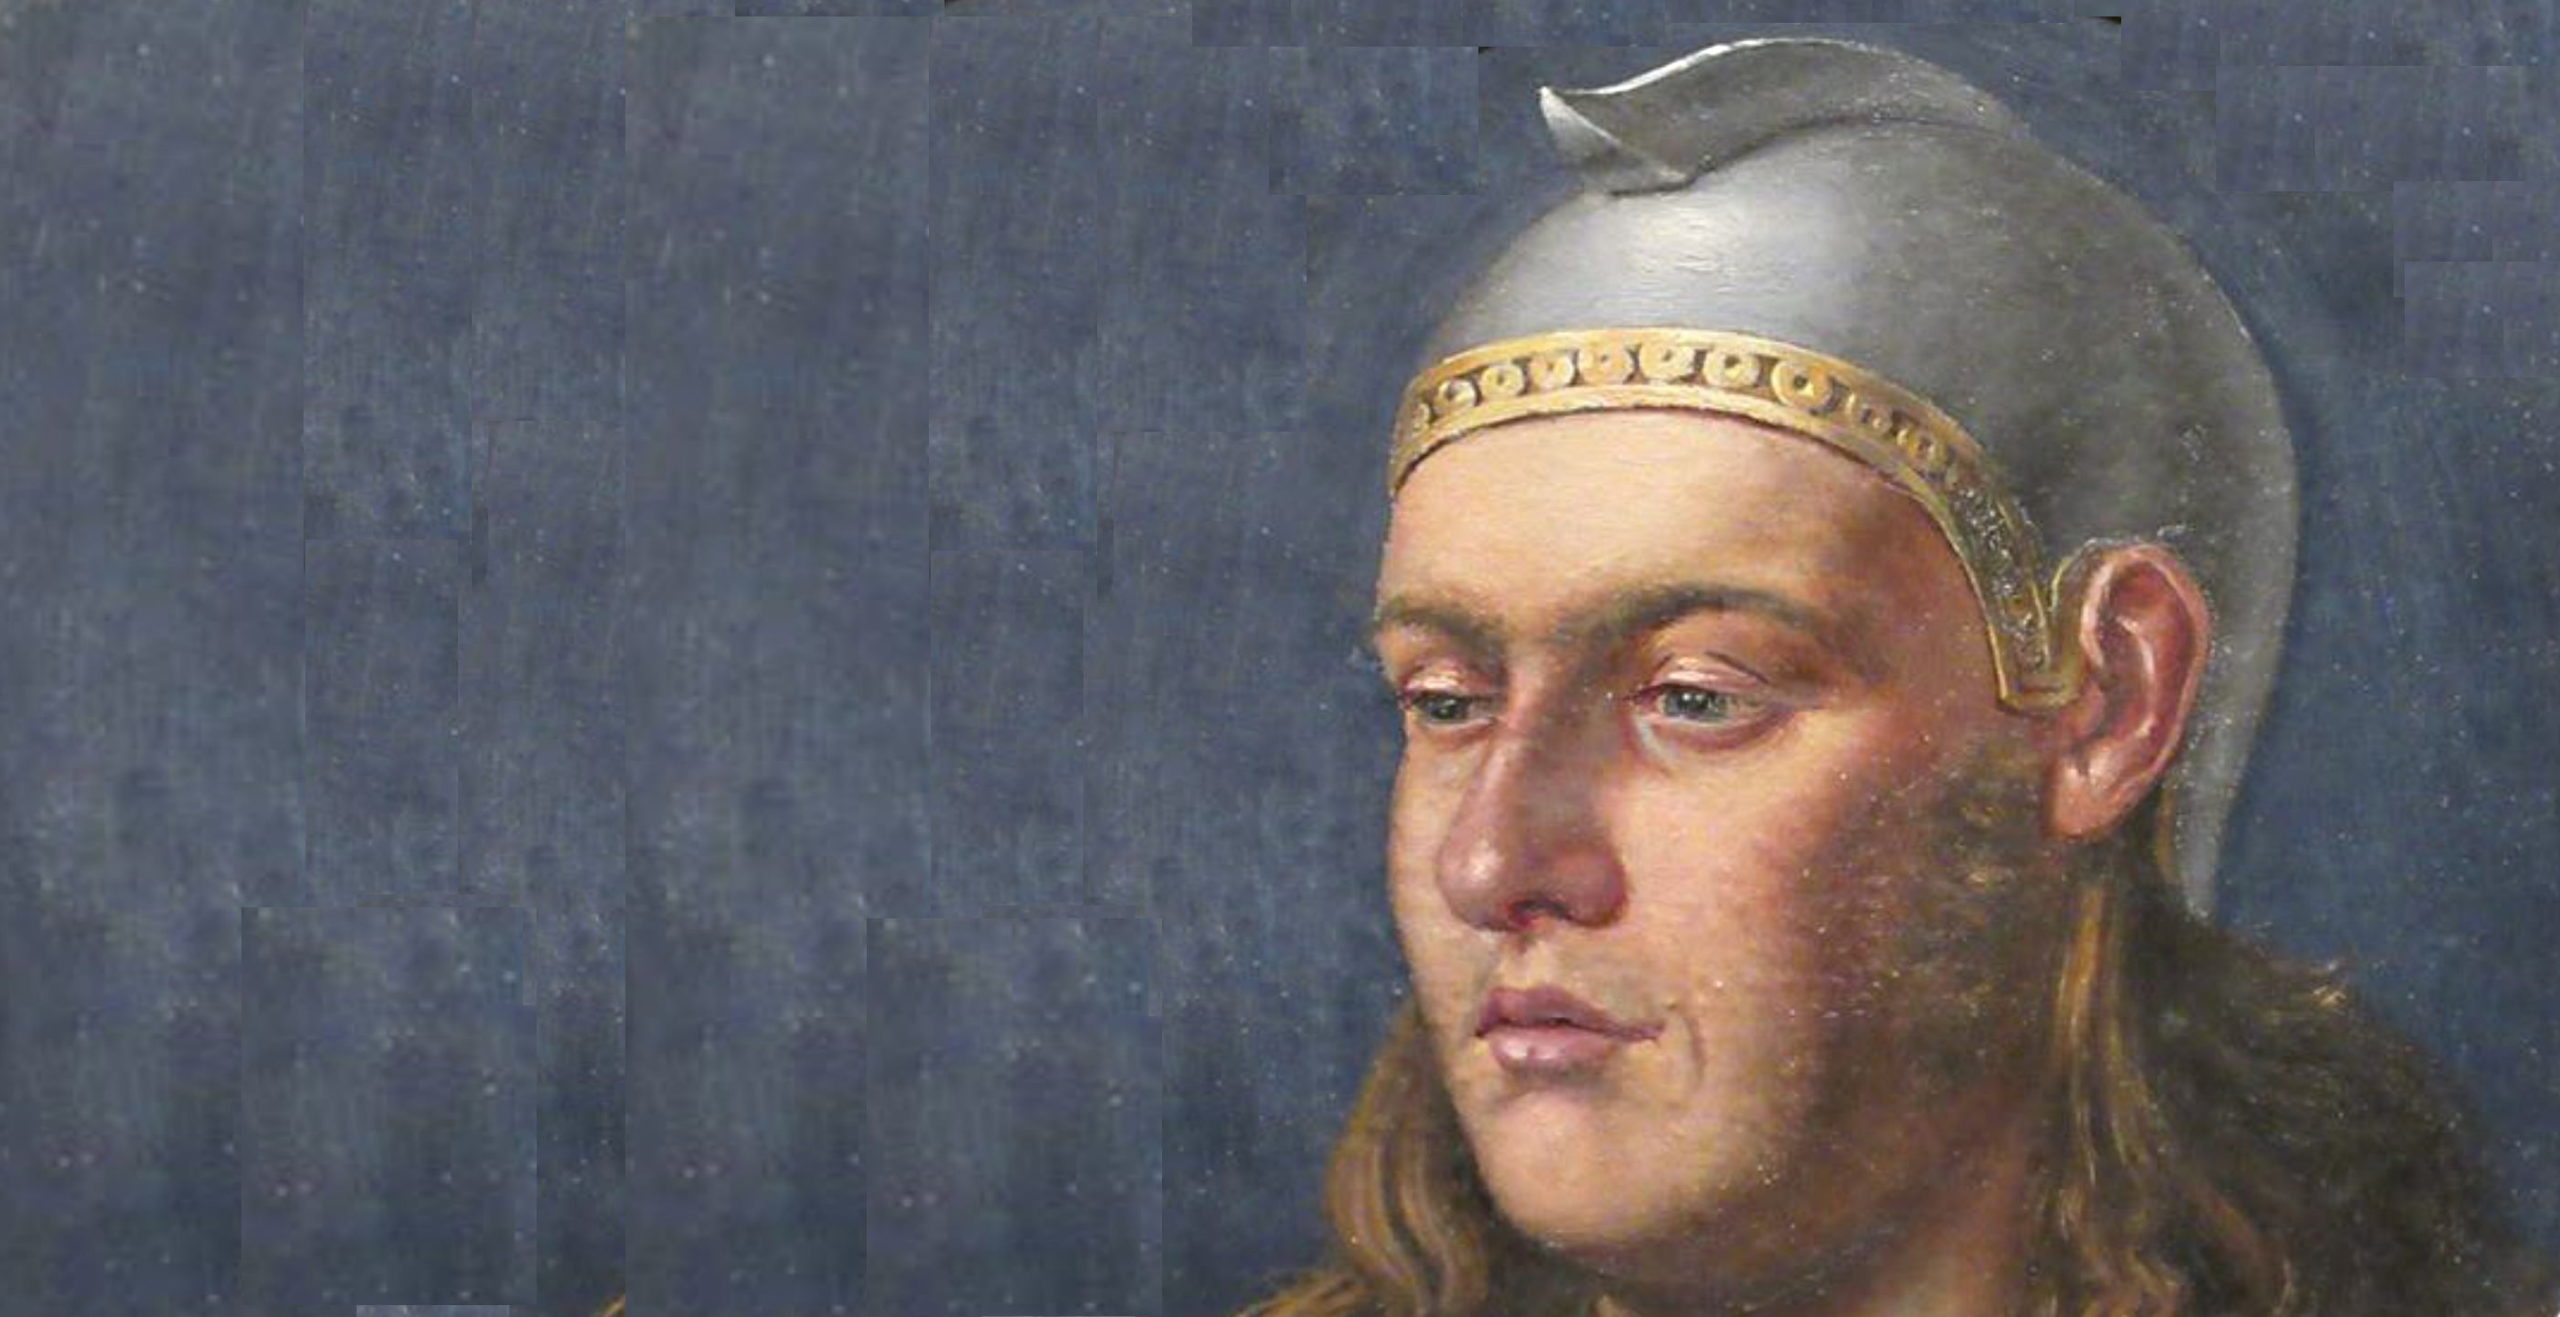 Who was Cnut the Great, ruler of the North Sea Empire?